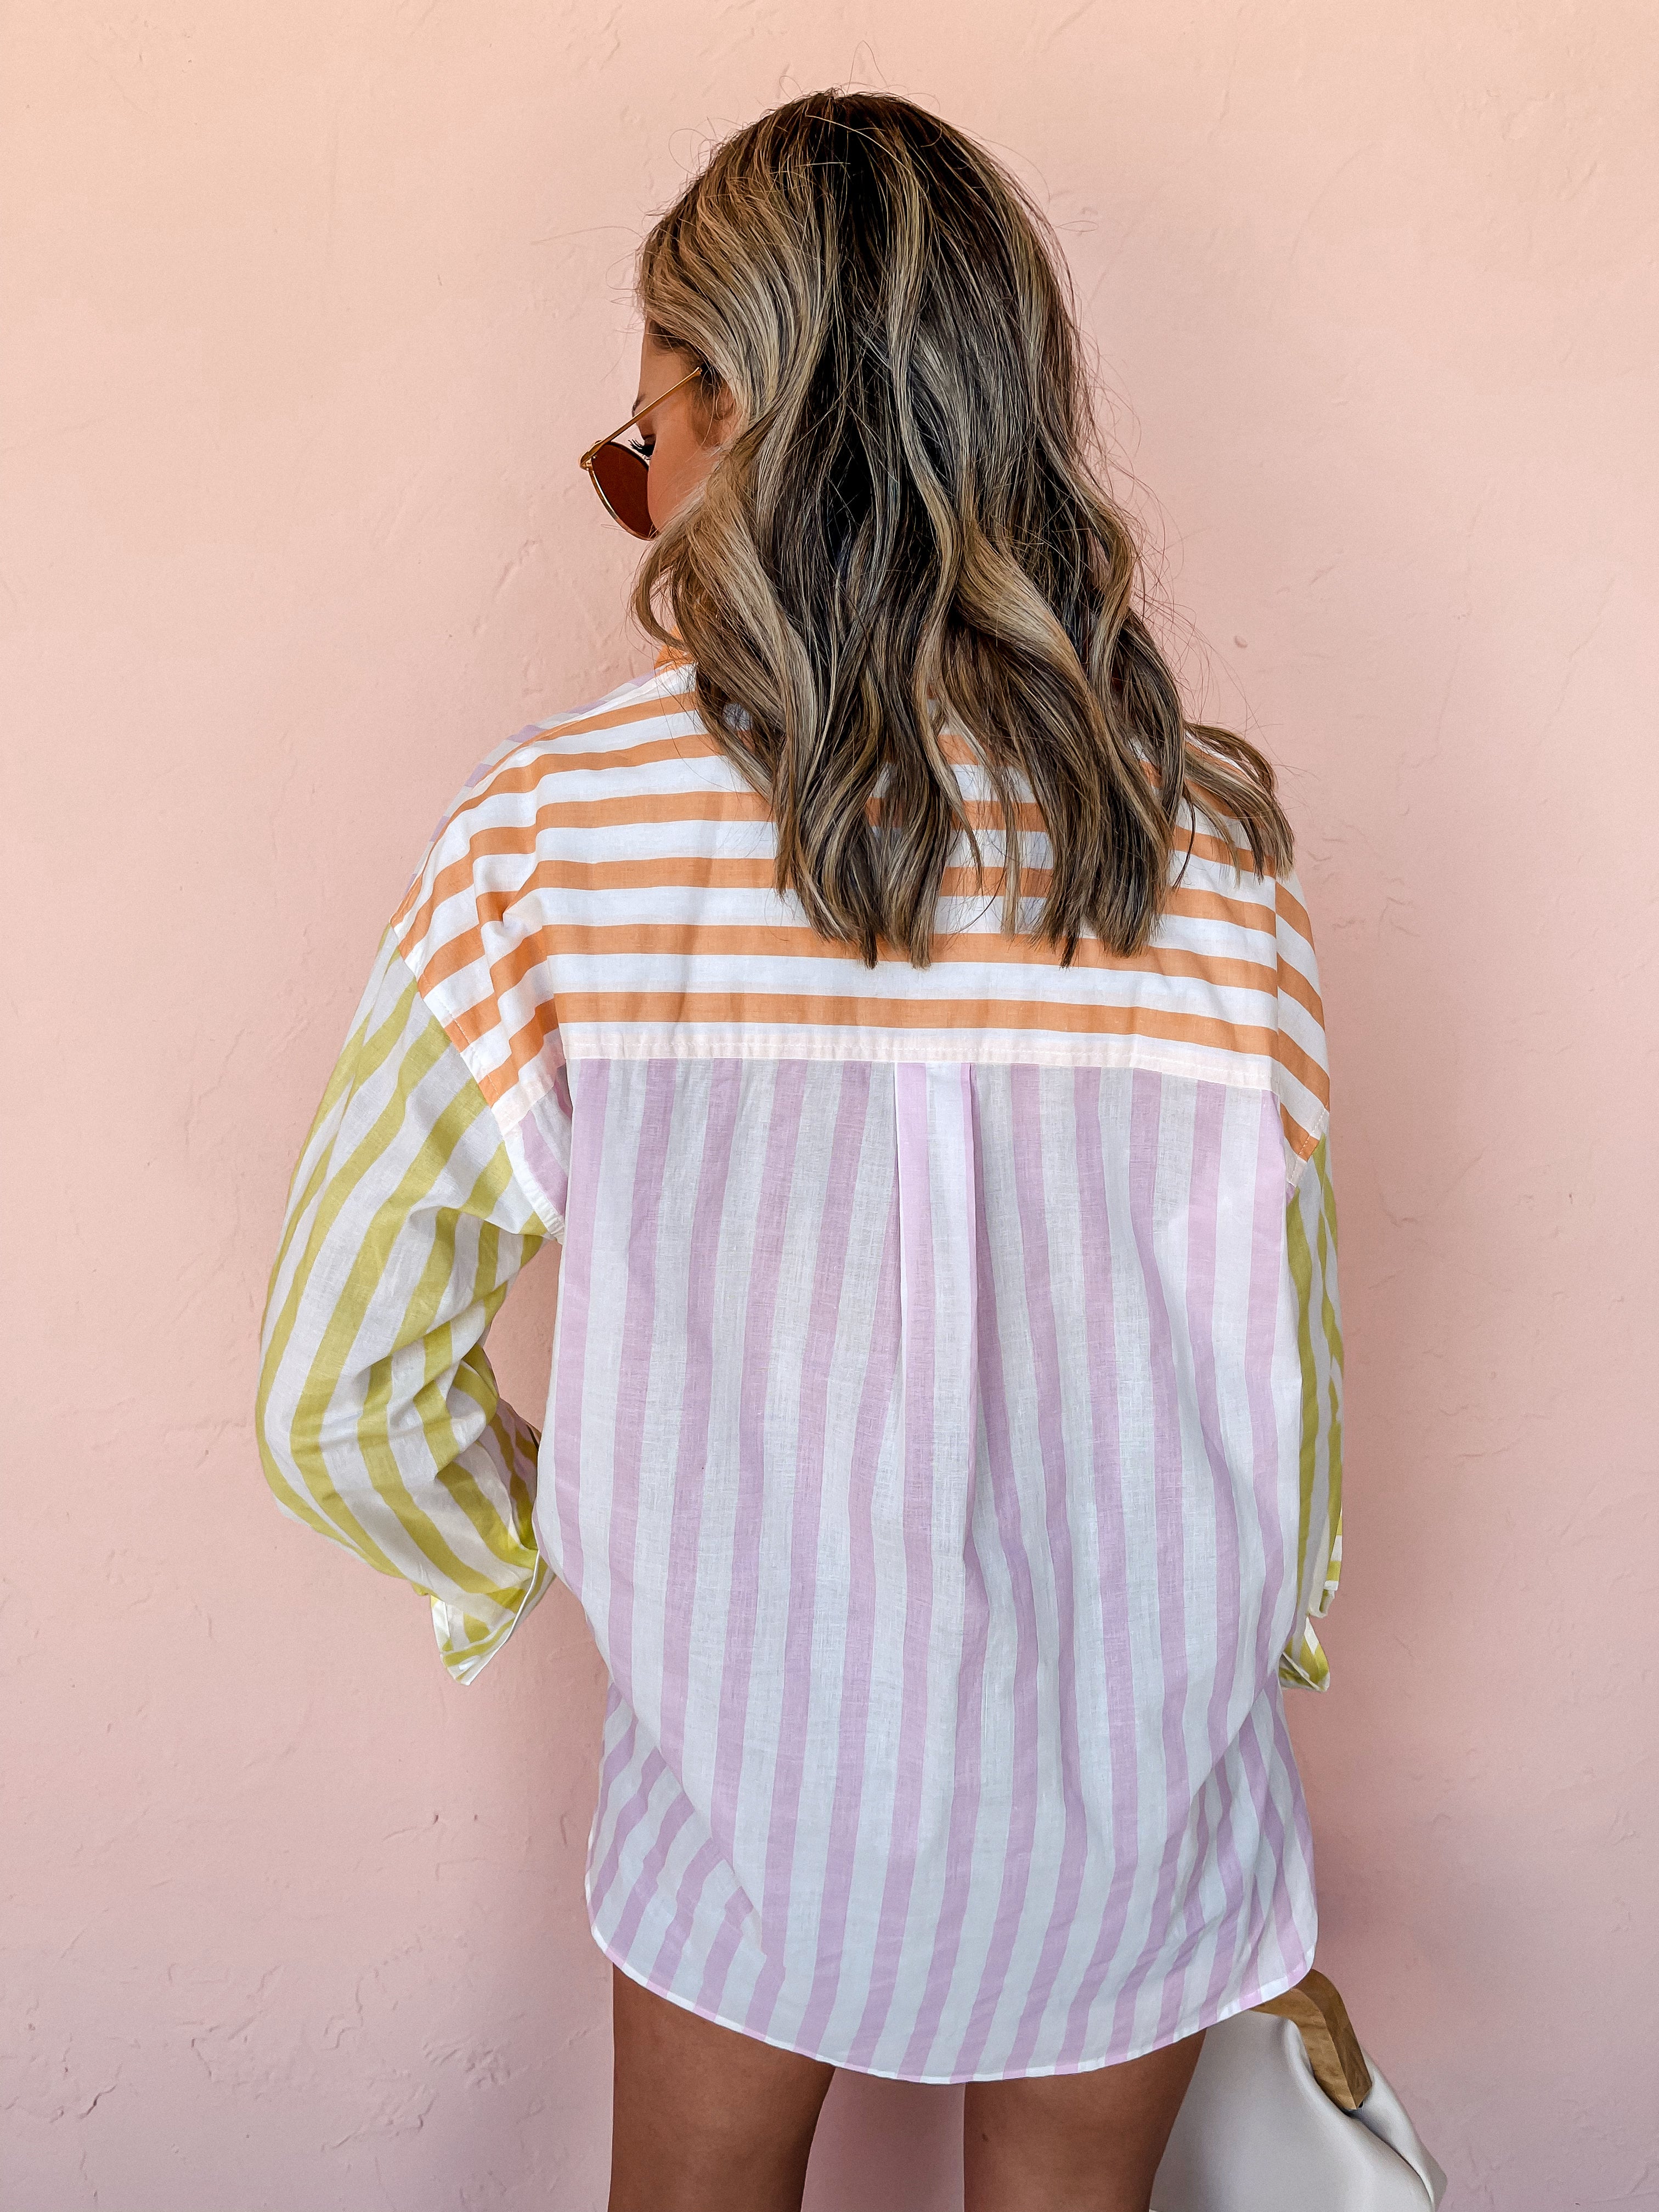 One More Time Striped Button Front Top